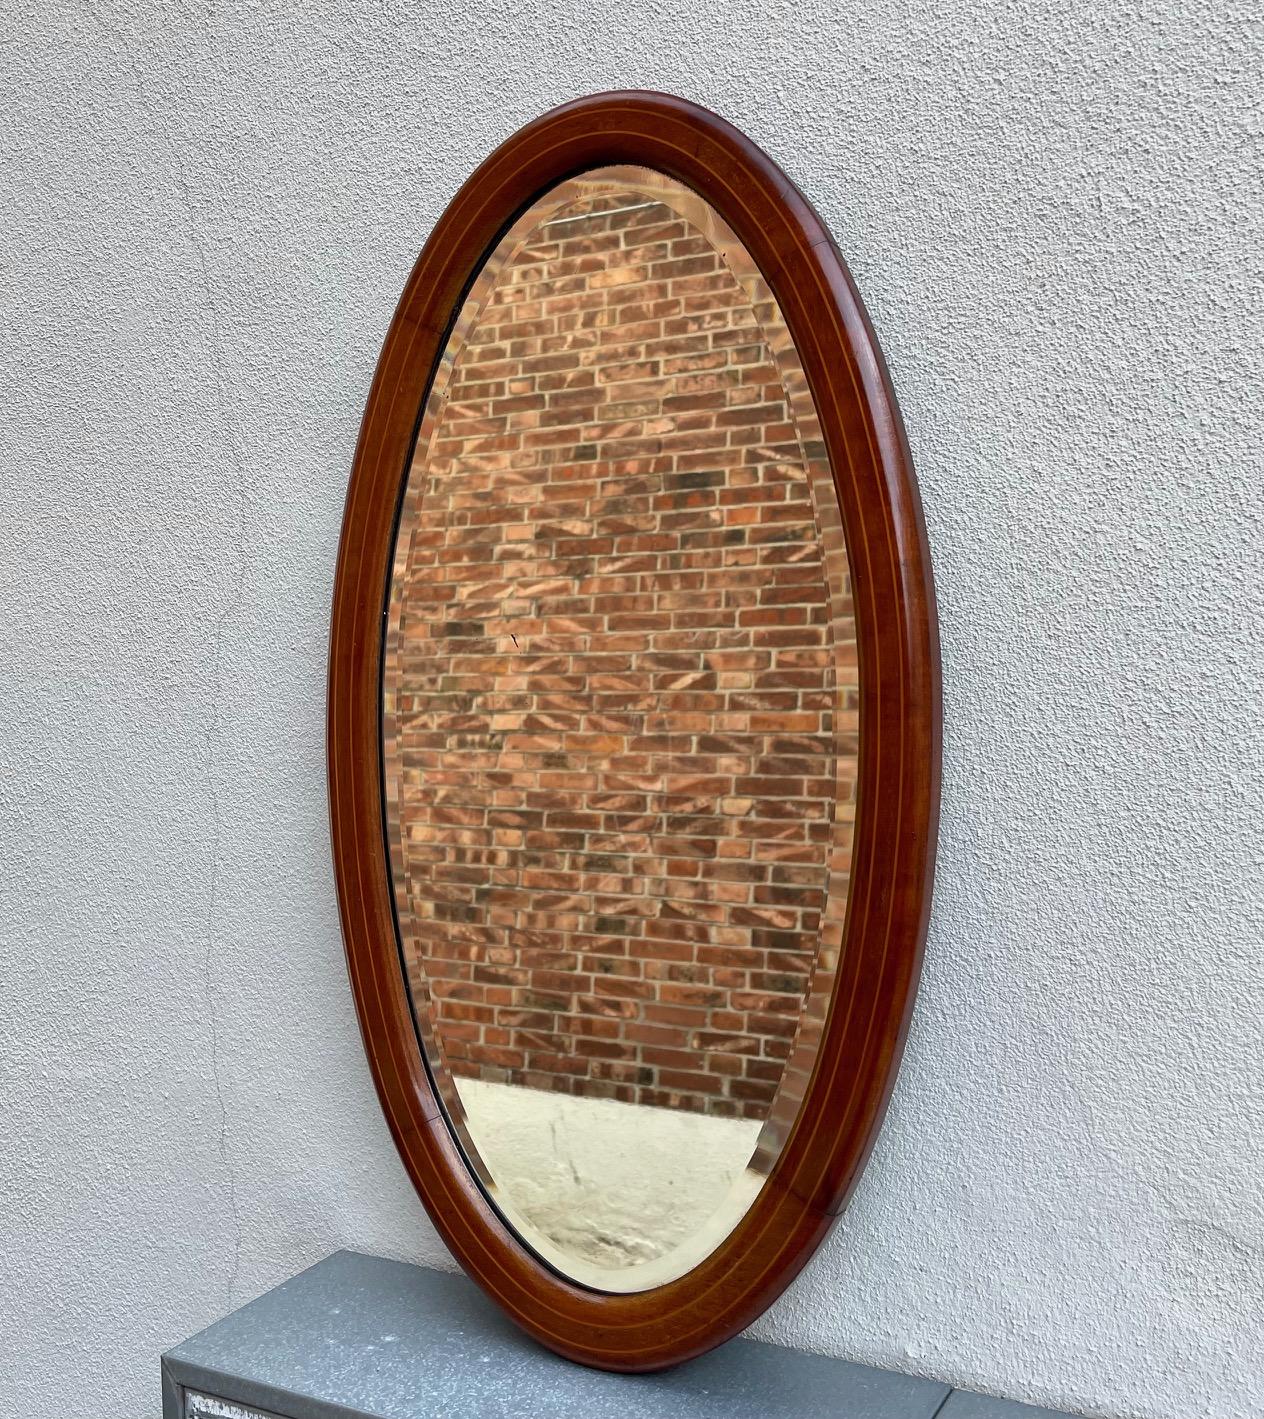 Small Oval Edwardian wall mirror. Executed in solid walnut inlaid with cherry. Beveled mirror glass. Made by an anonymous cabinetmaker in Denmark or England circa 1910. Measurements: 67x37 cm (26x14 inch).